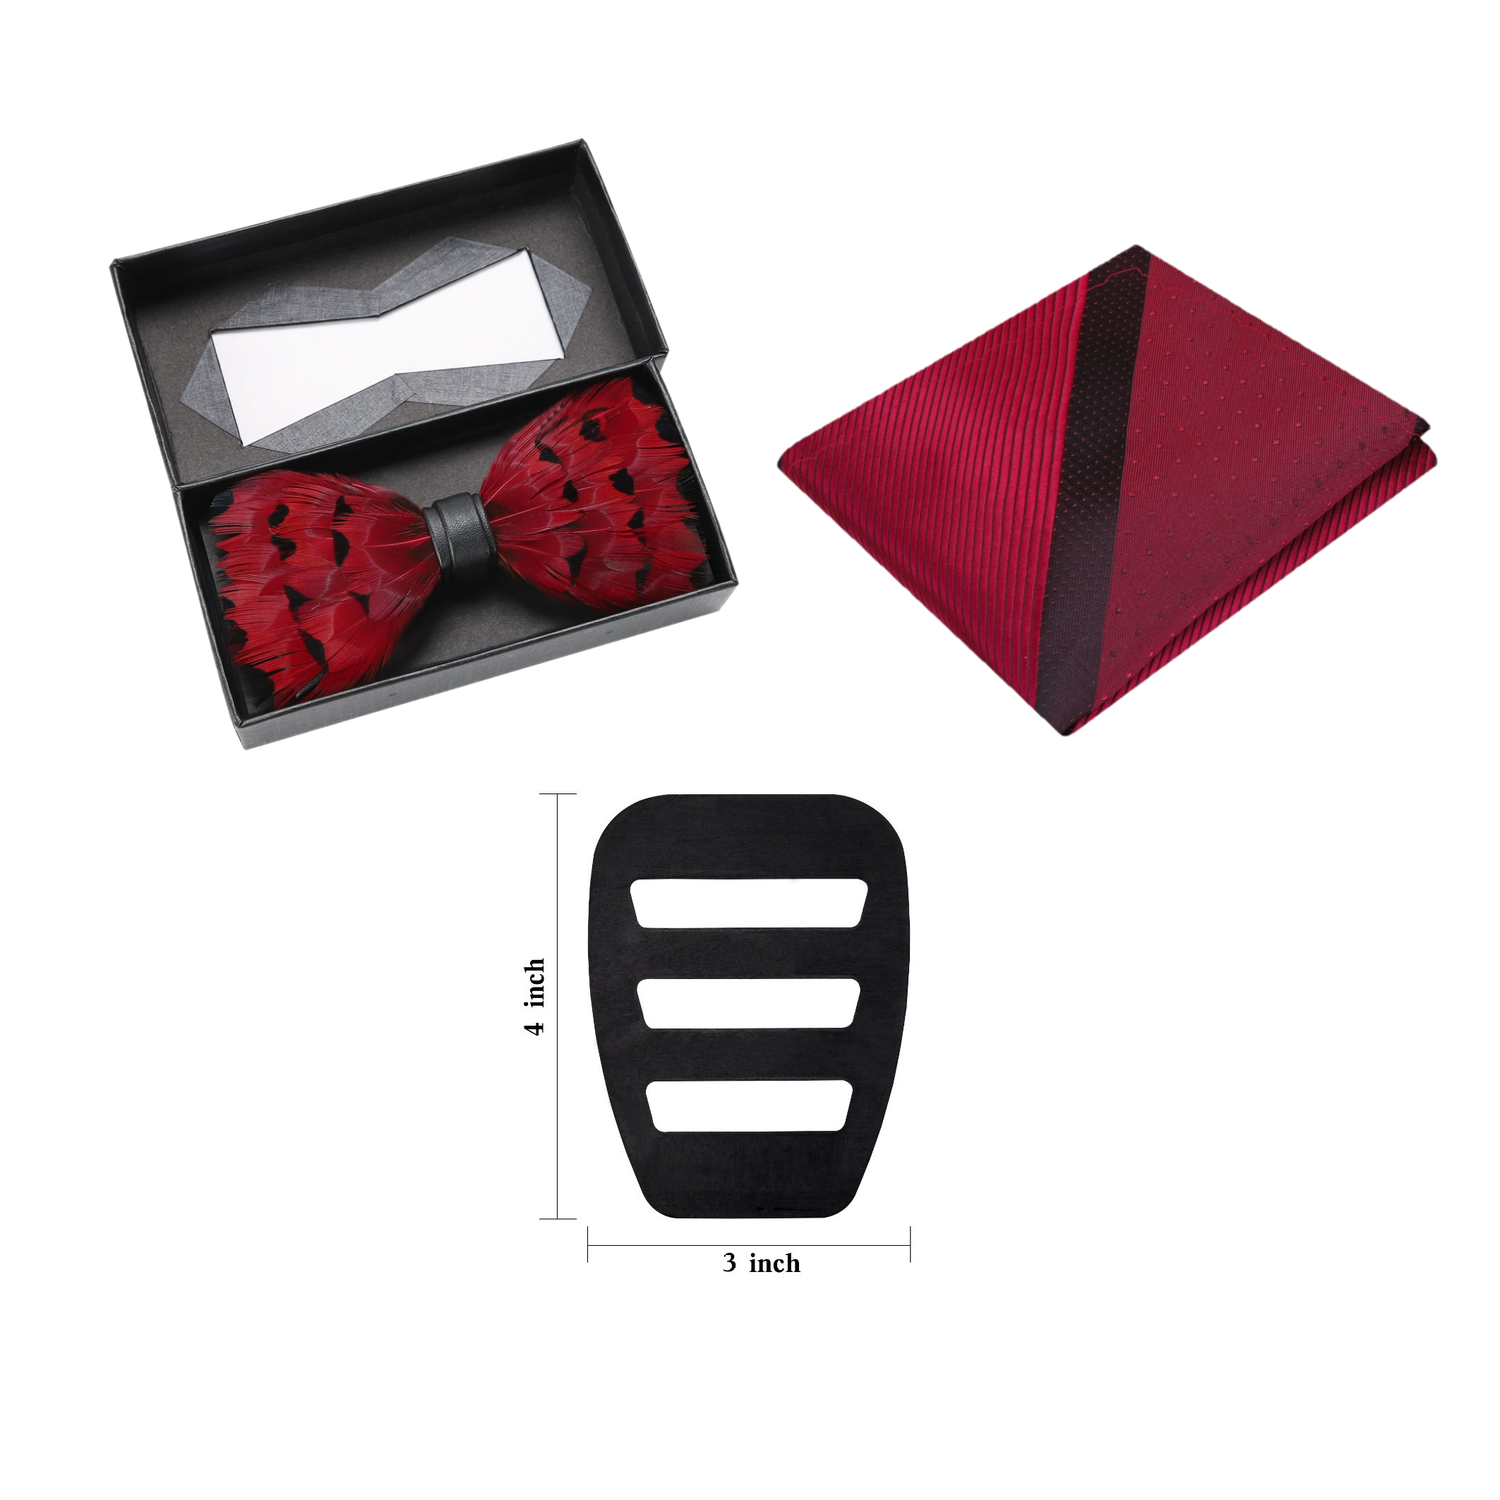 Red, Black Feather Bow Tie, Red Square and Pocket Square Holder